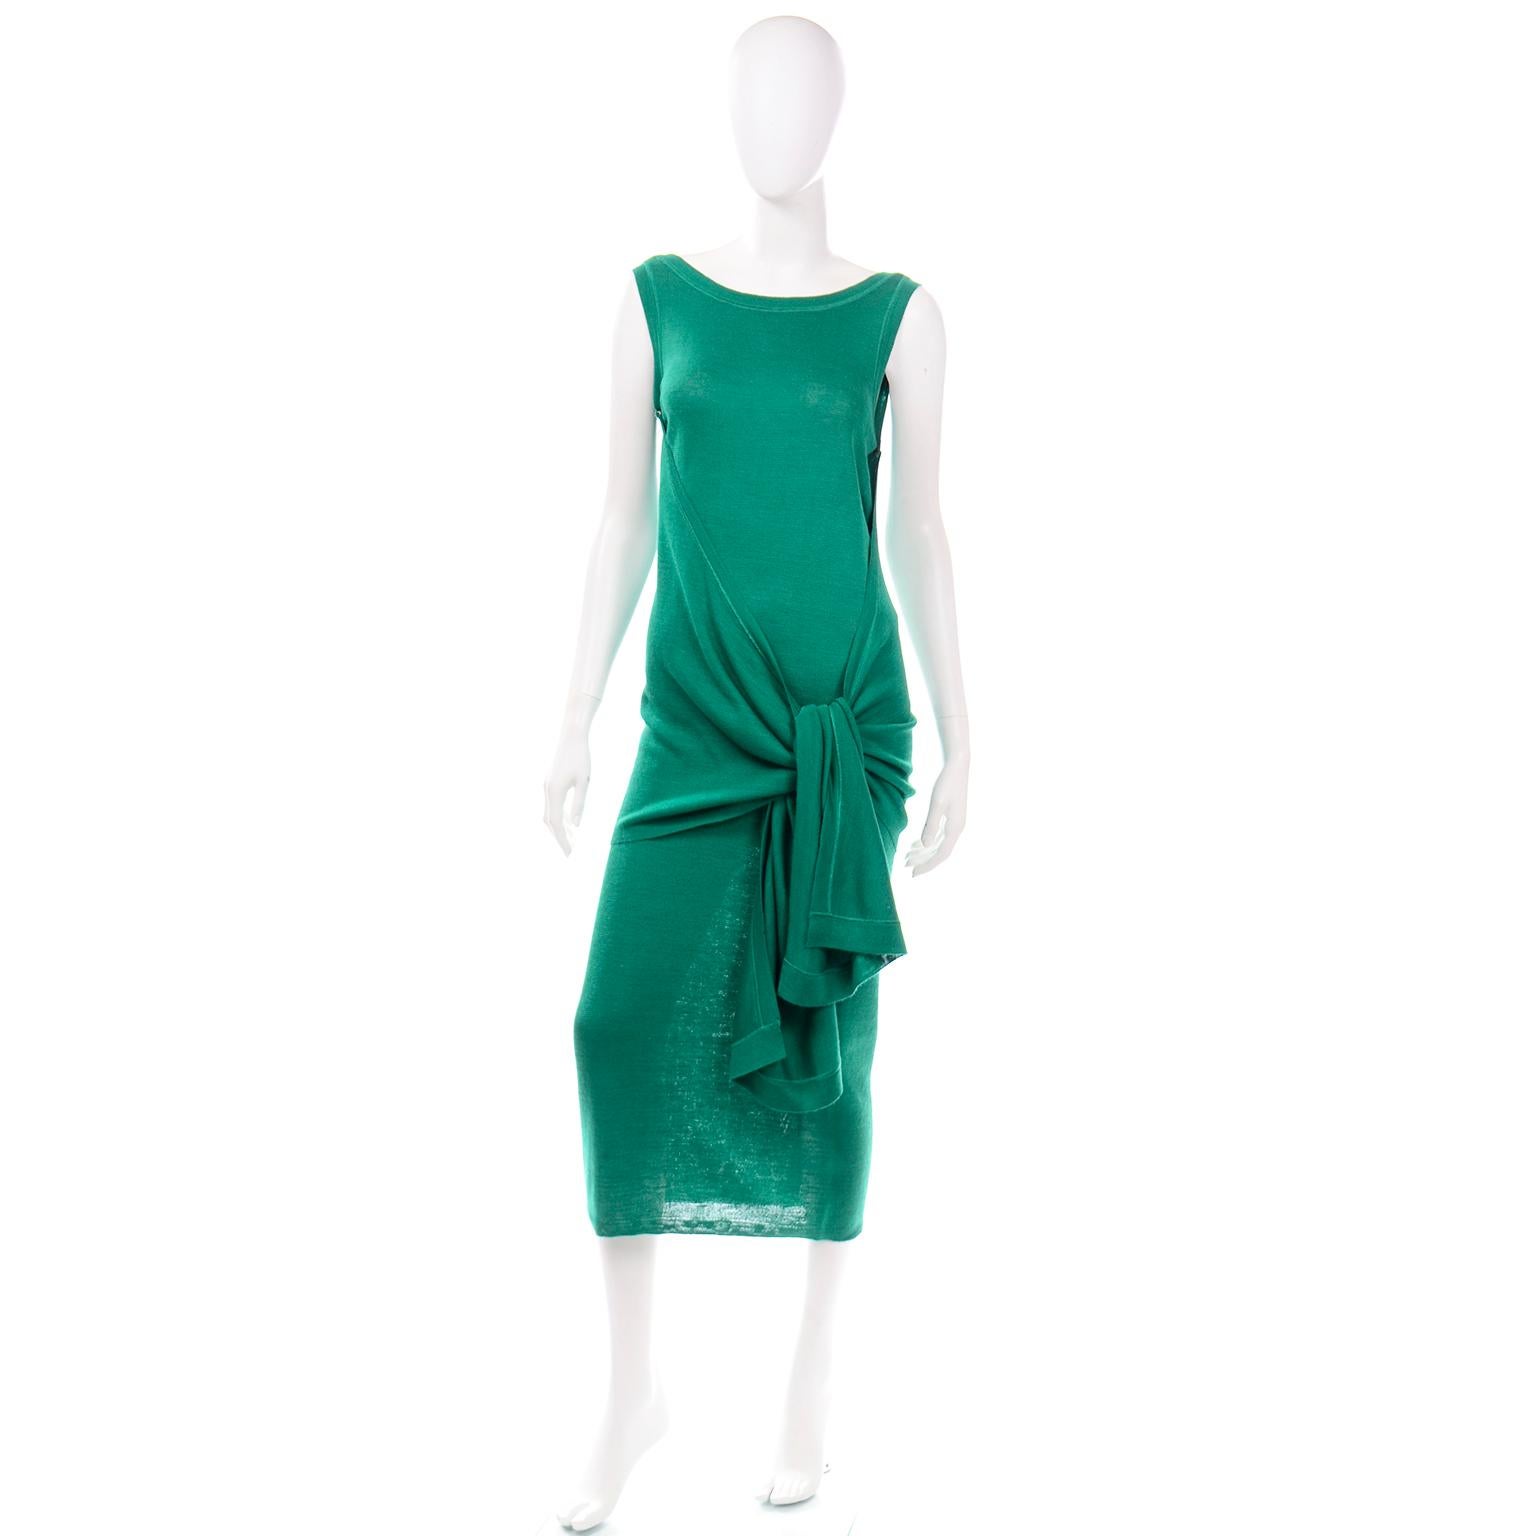 Angelo Tarlazzi Paris Vintage Emerald Green Stretch Knit Dress W Drape Wrap In Excellent Condition For Sale In Portland, OR